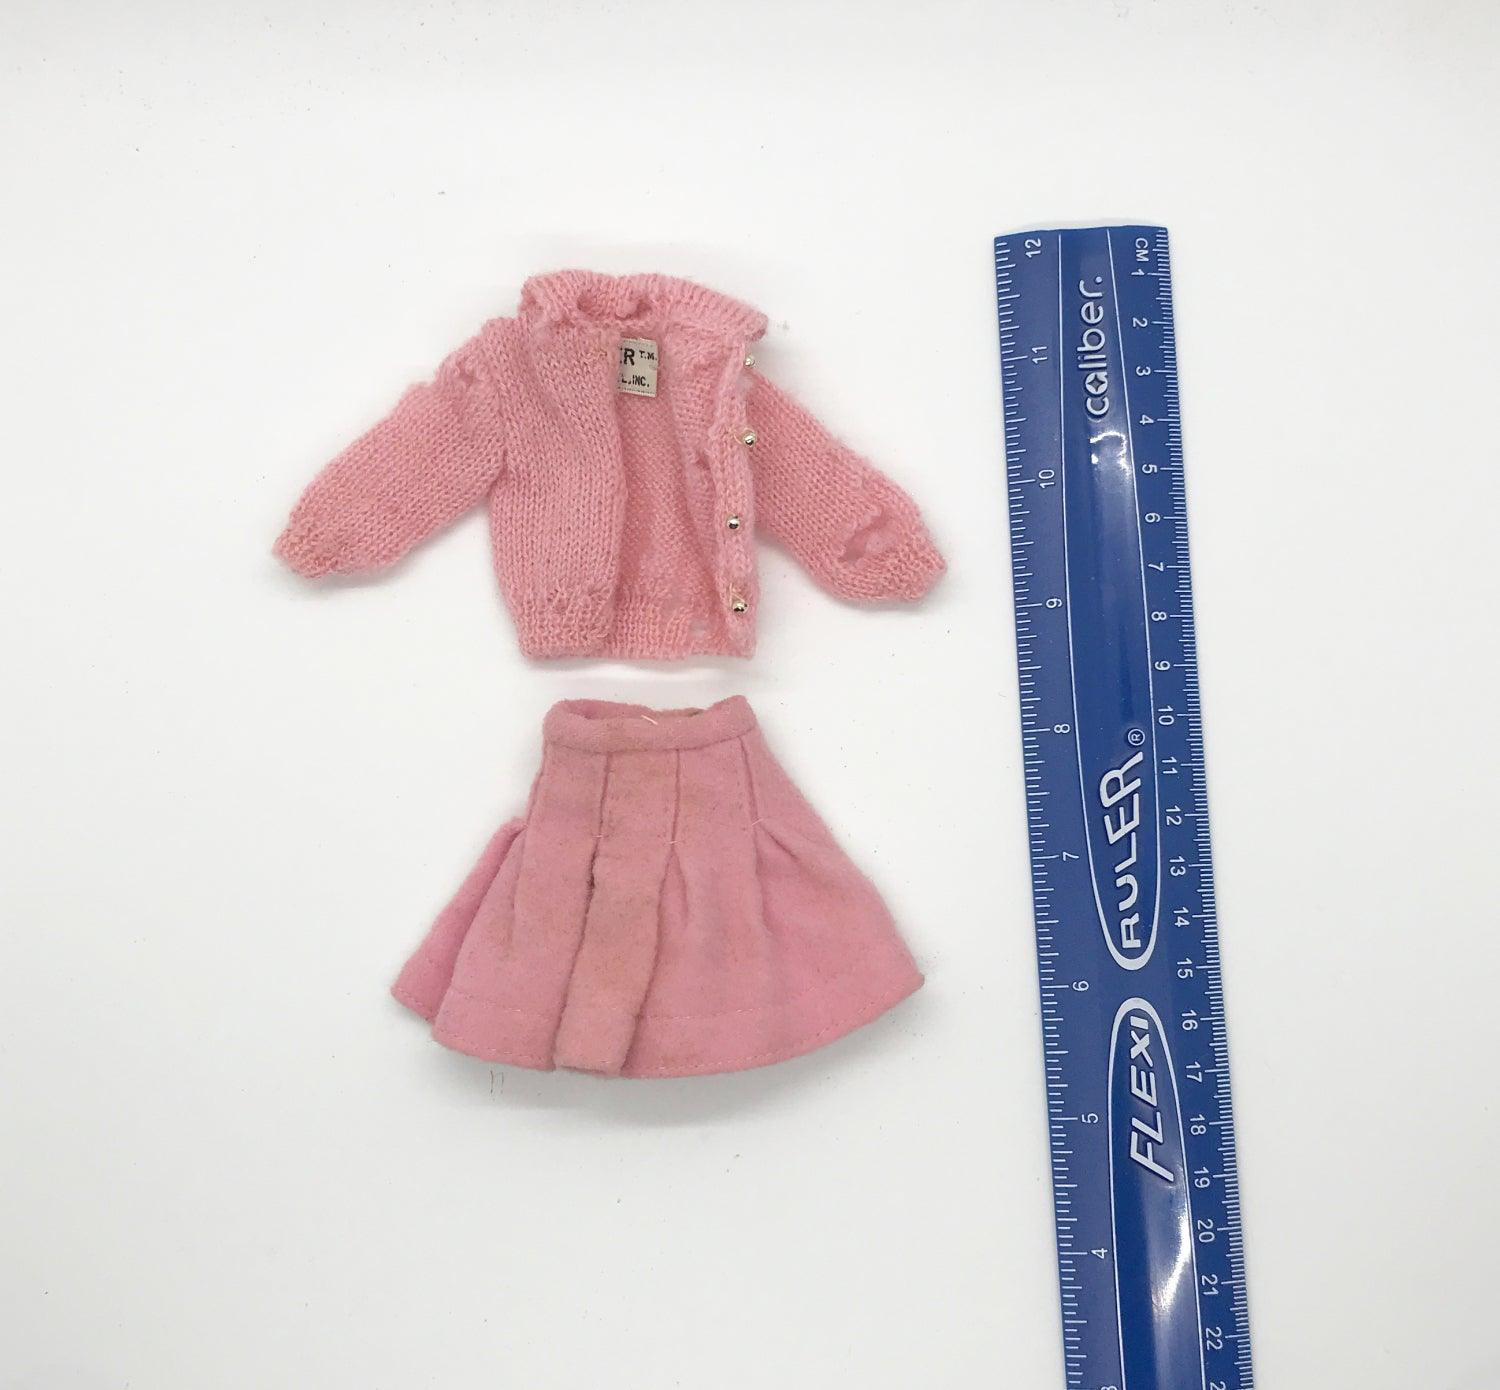 Vintage set for Barbie's laundry day